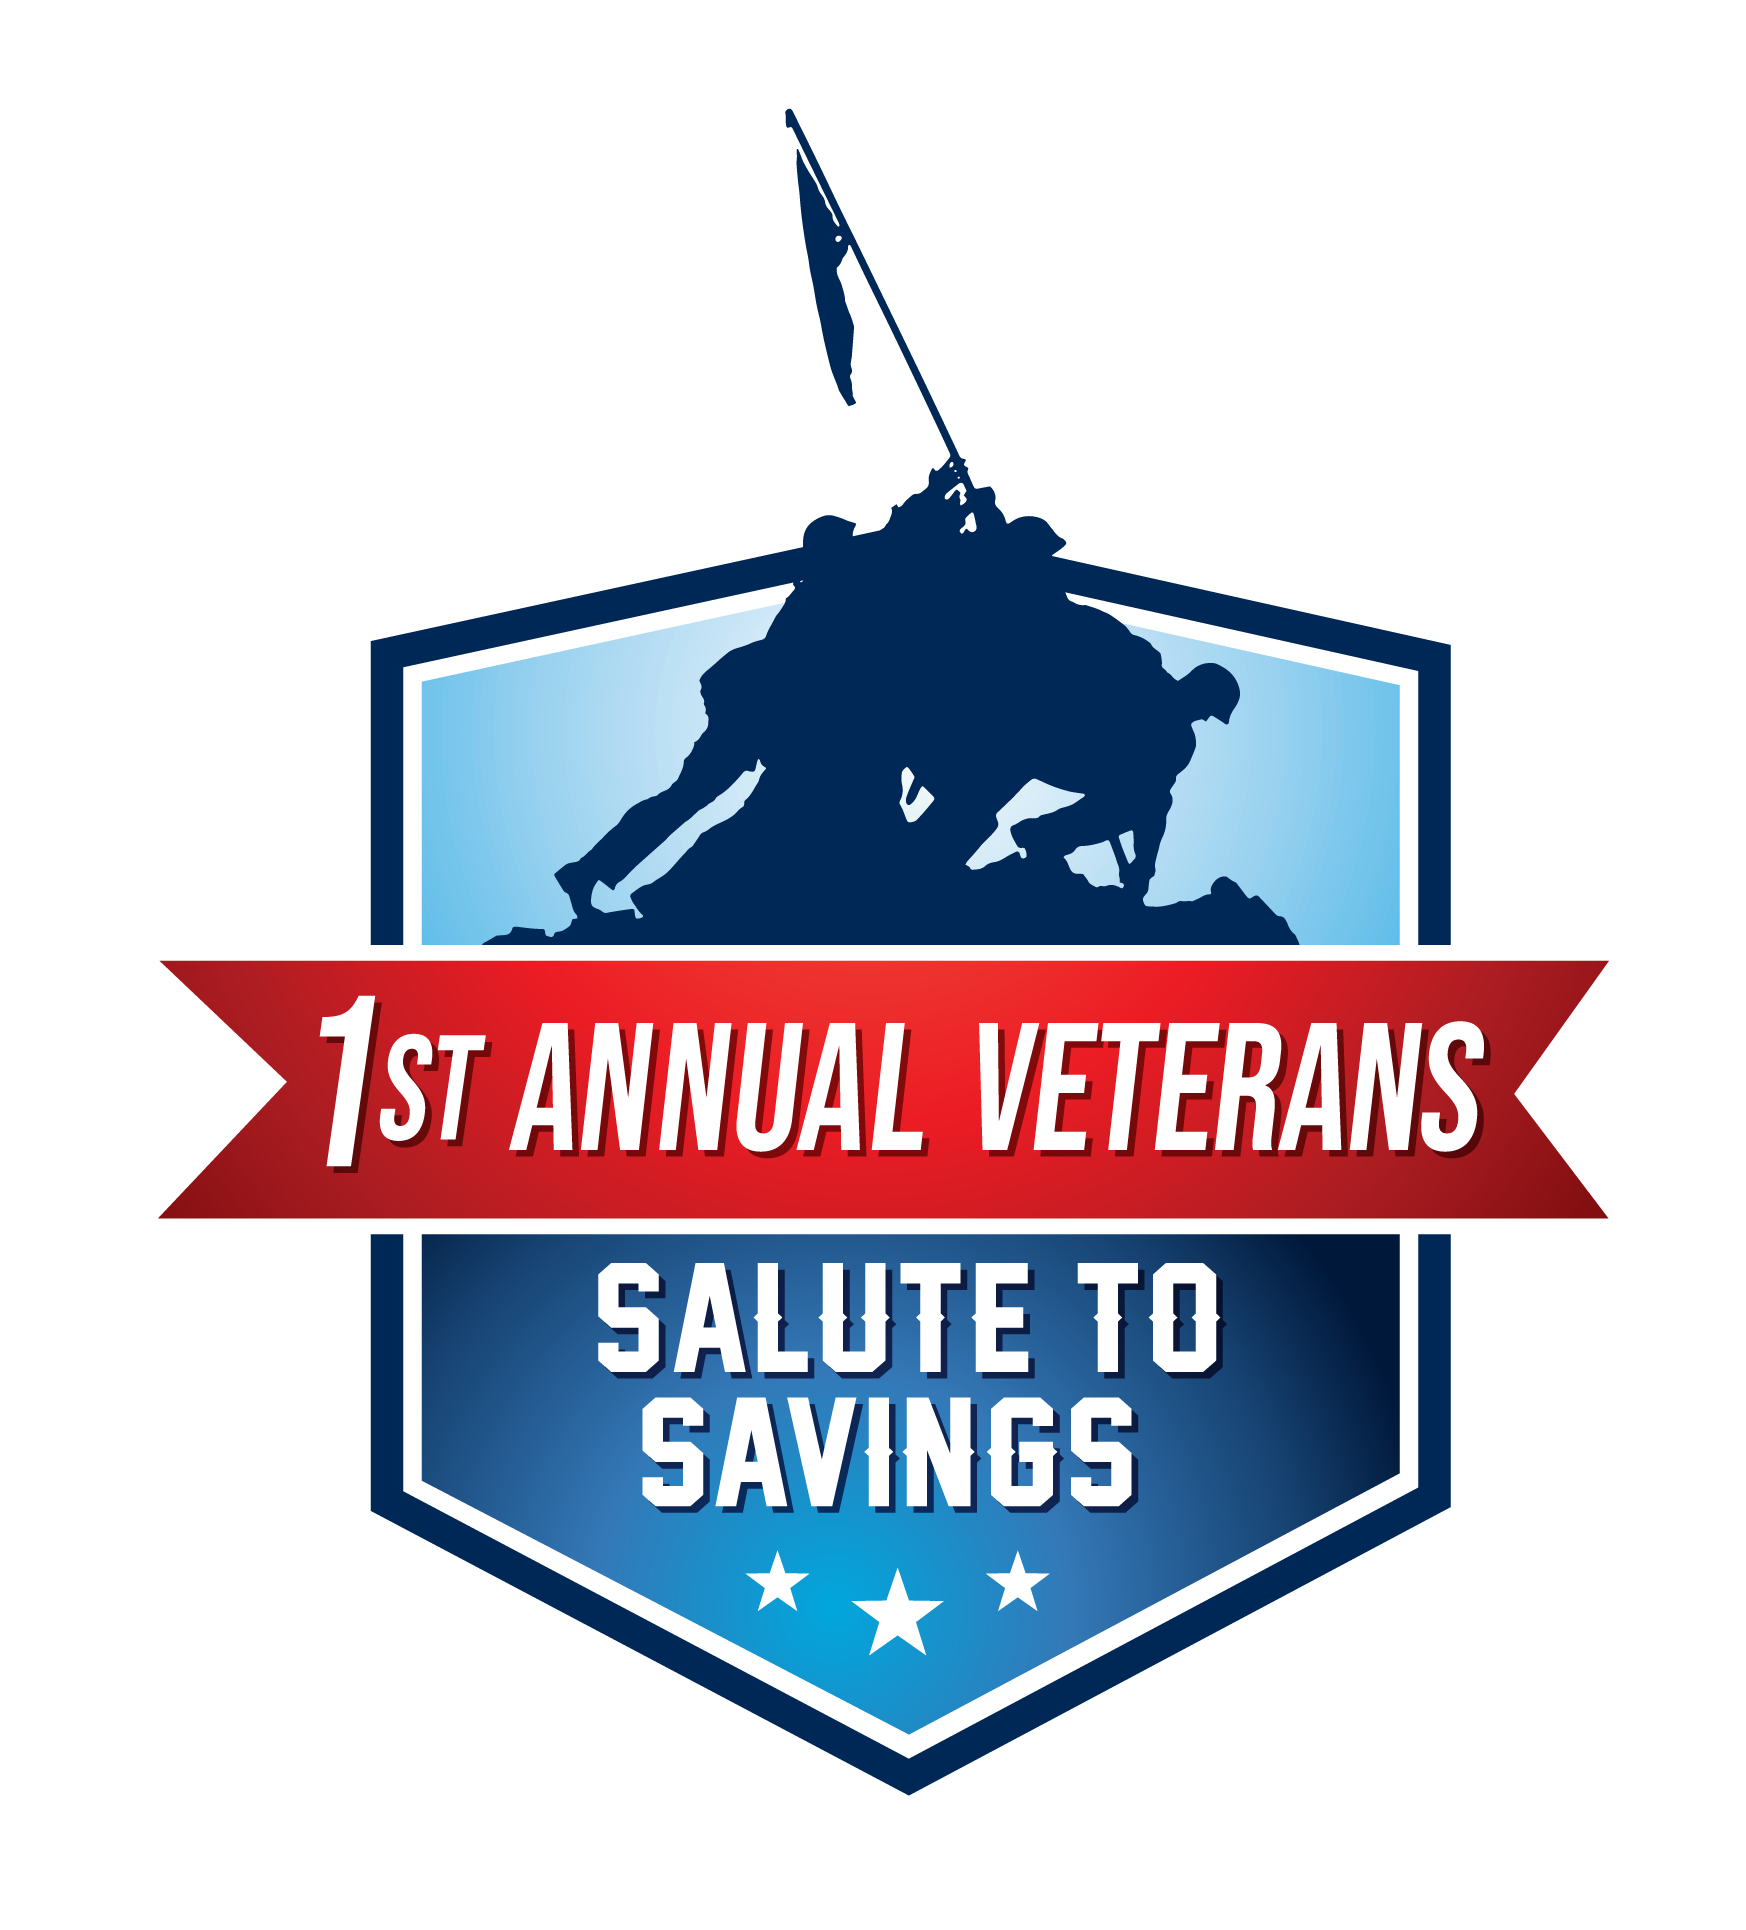 Free Gift to Veteran - Fill our Form to Win